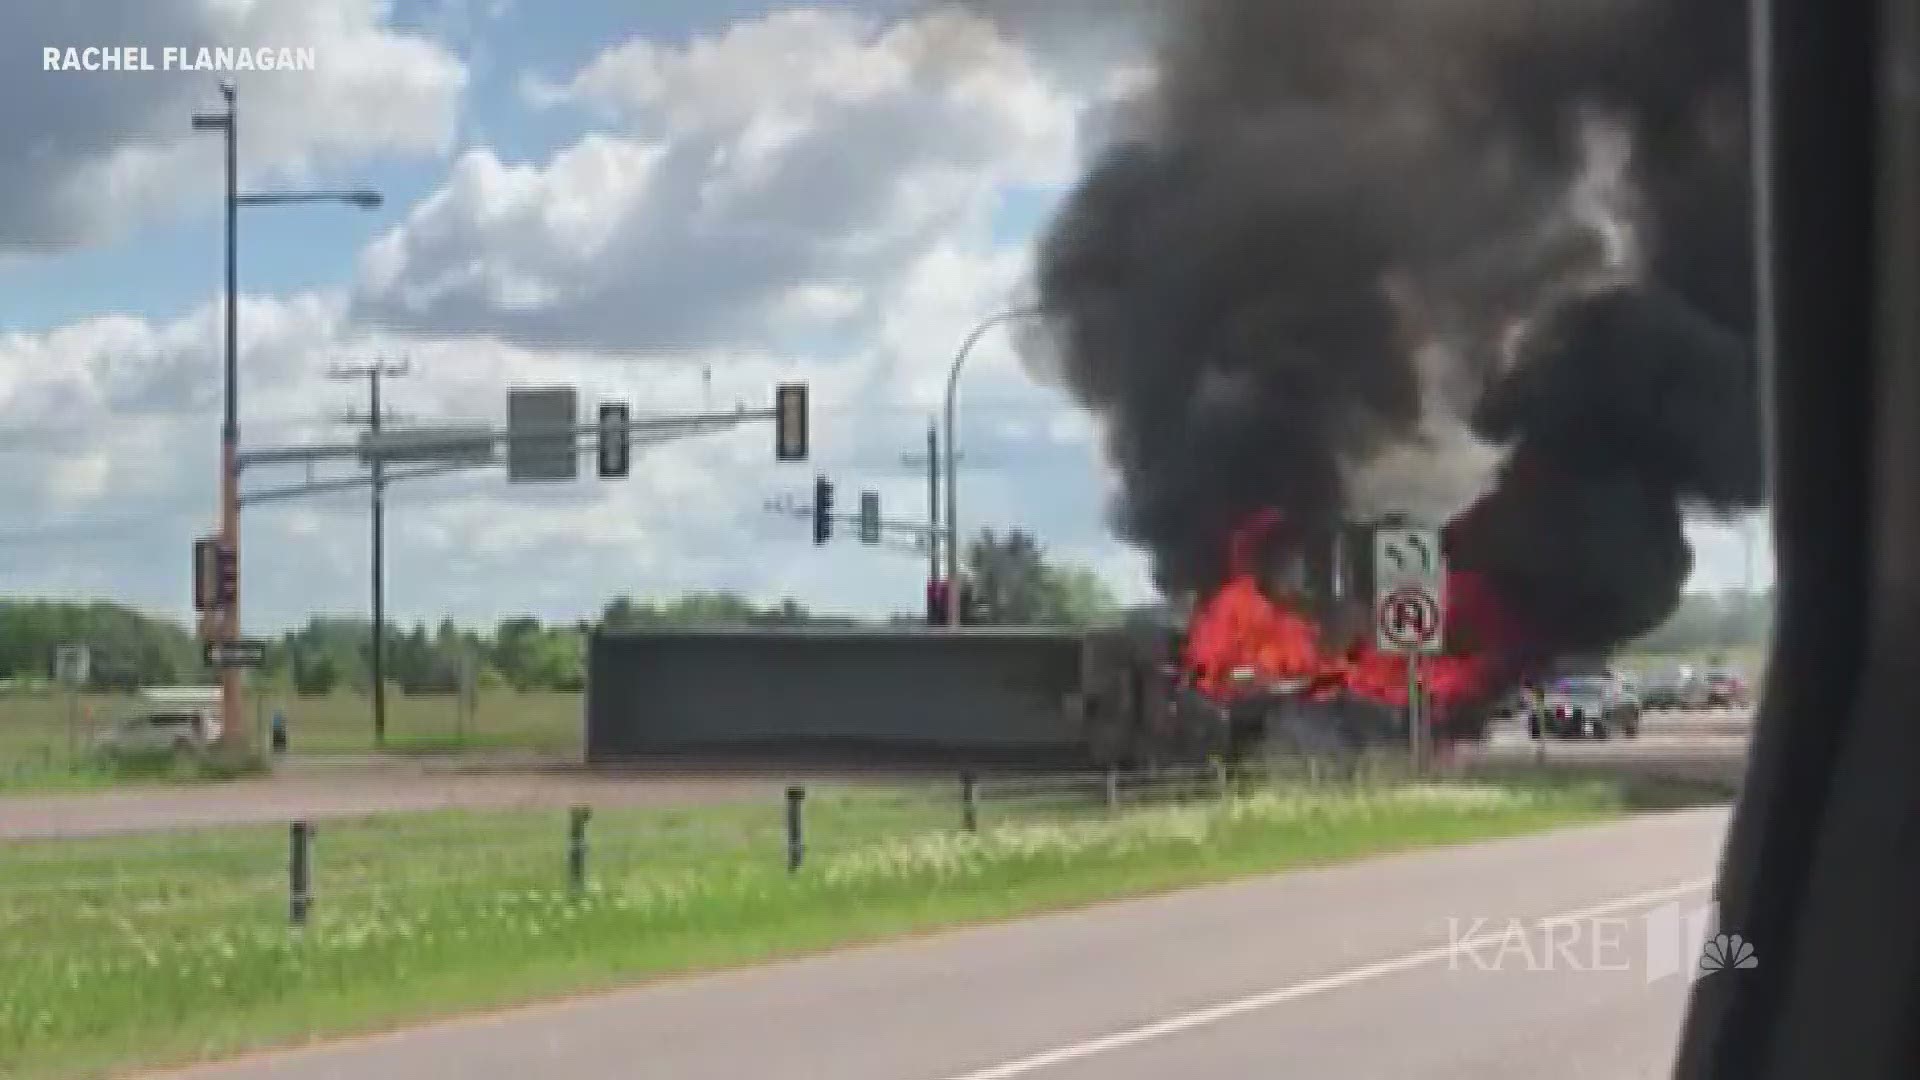 A crash involving a semi that started on fire shut down Highway 36 westbound on Tuesday.